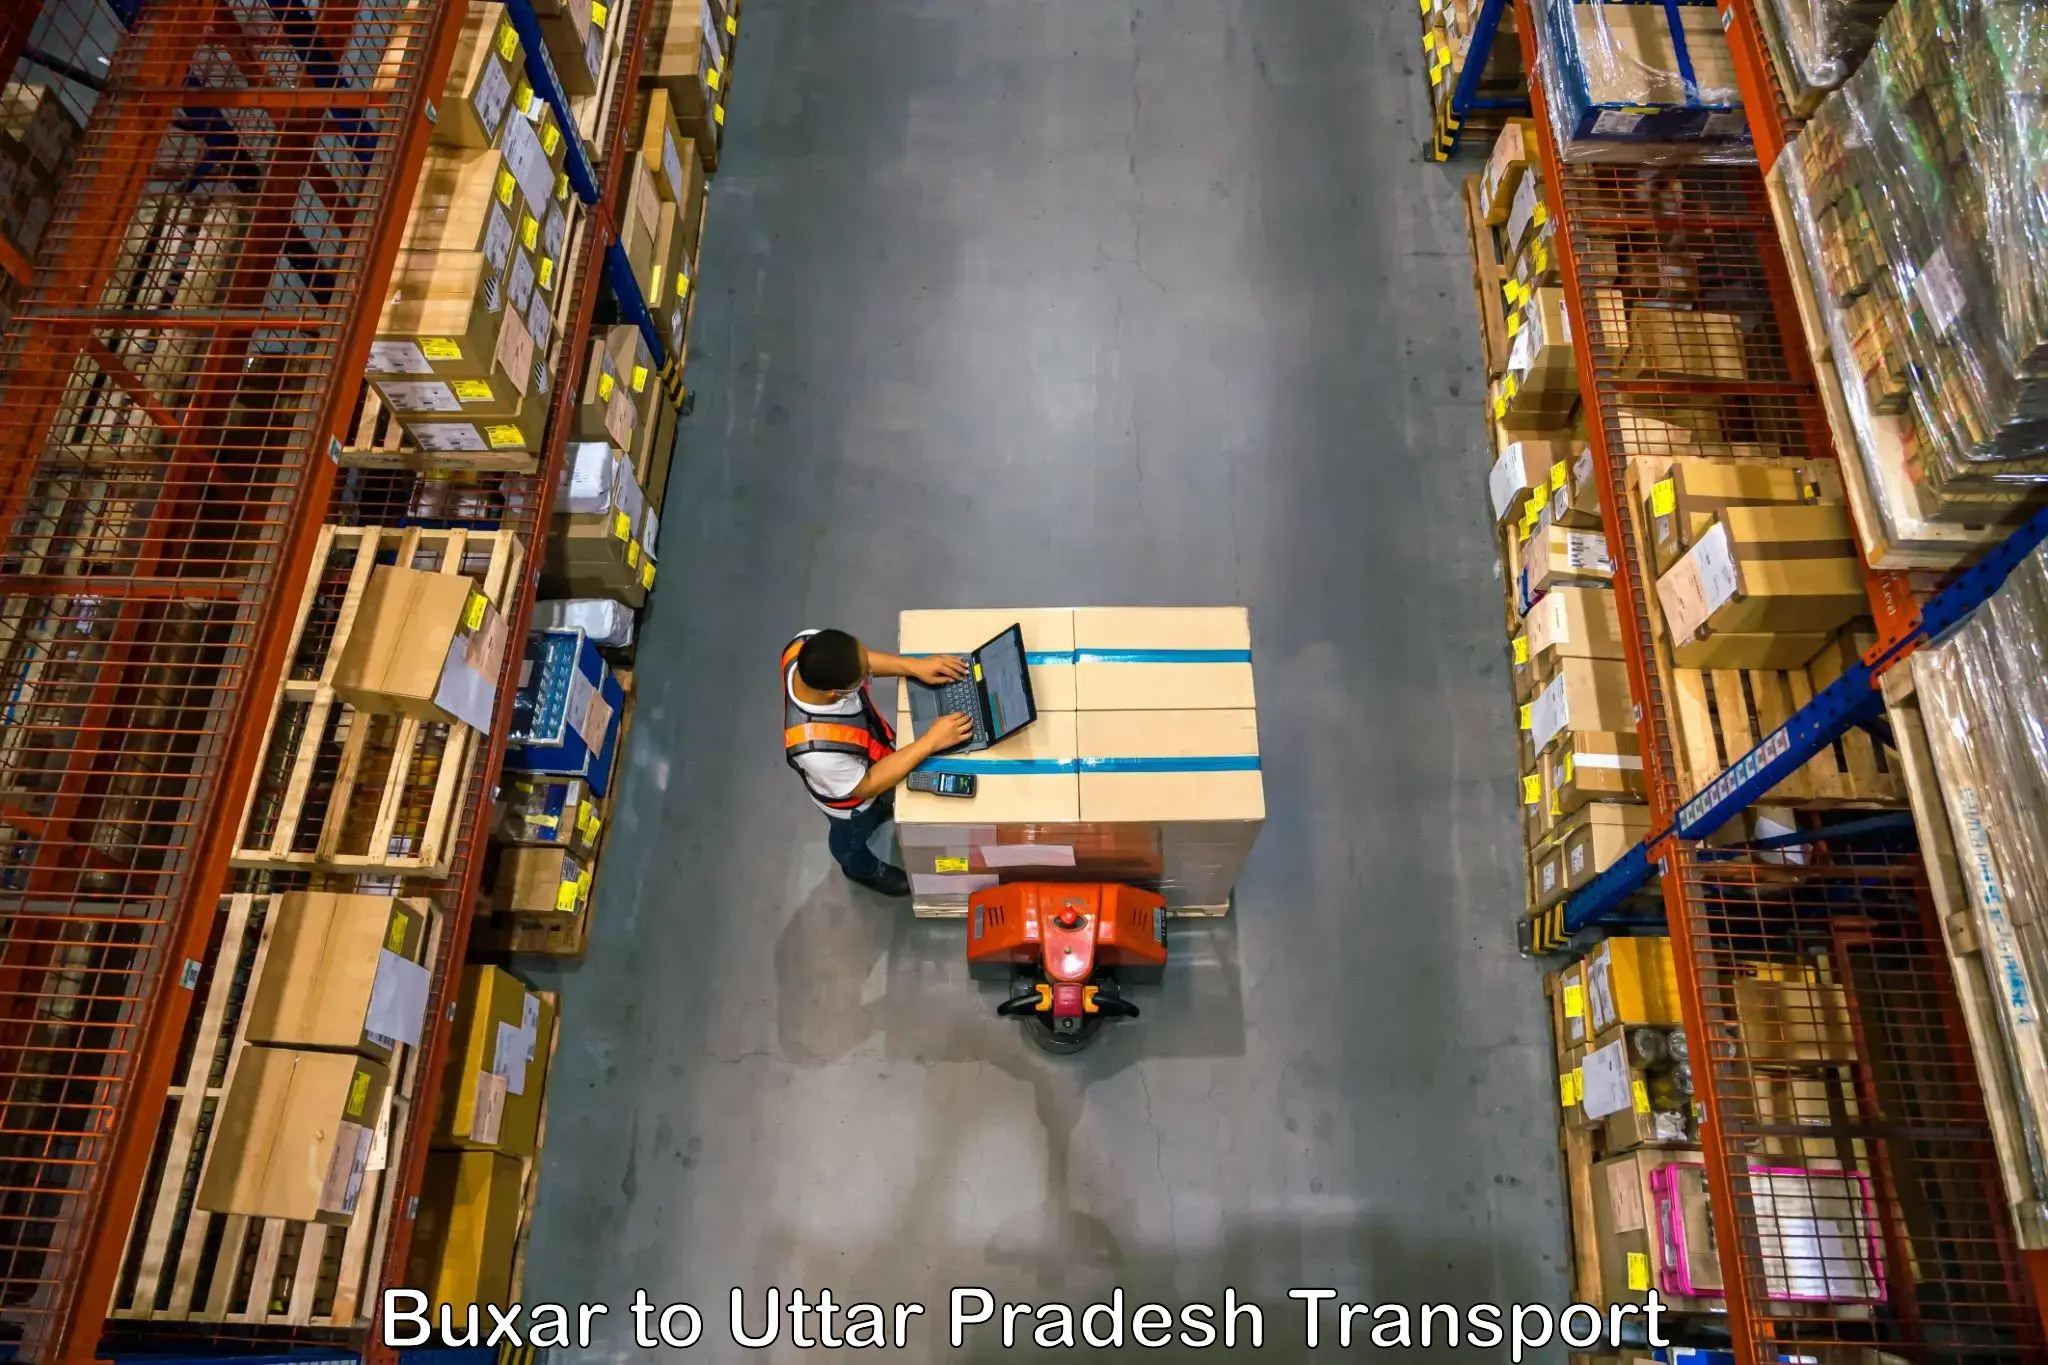 Goods delivery service Buxar to Khalilabad